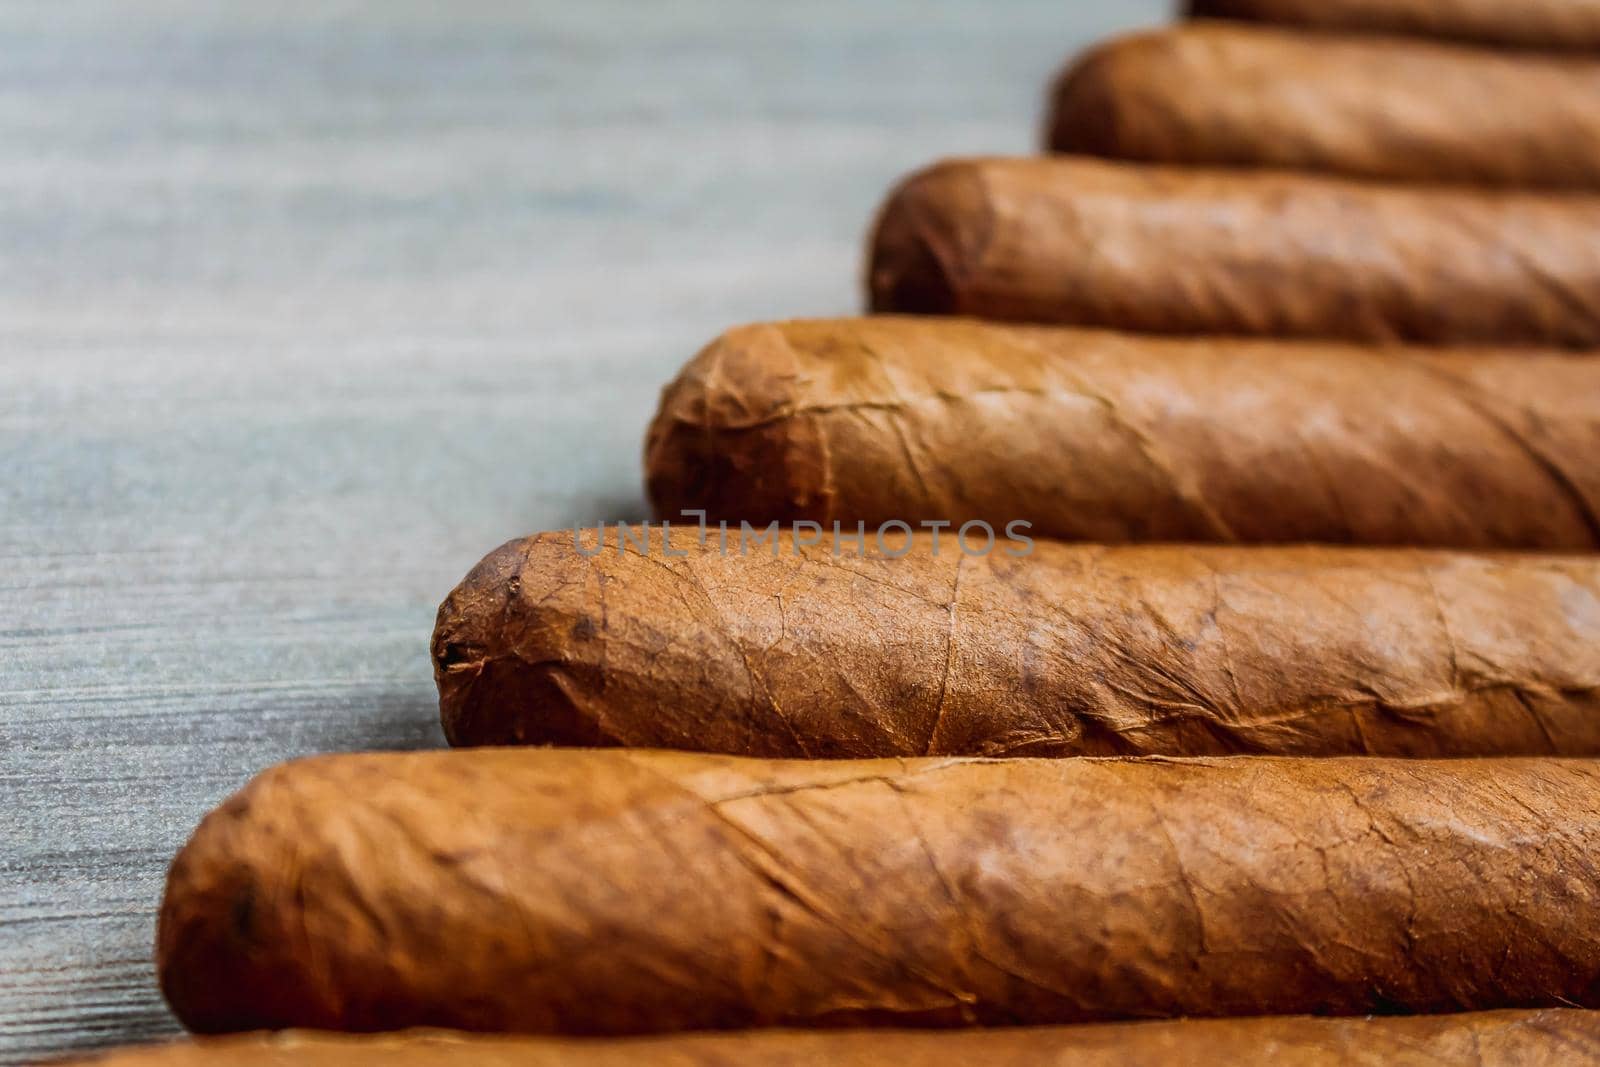 Many cigars on the wooden background. Rolled cigars by JuliaDorian